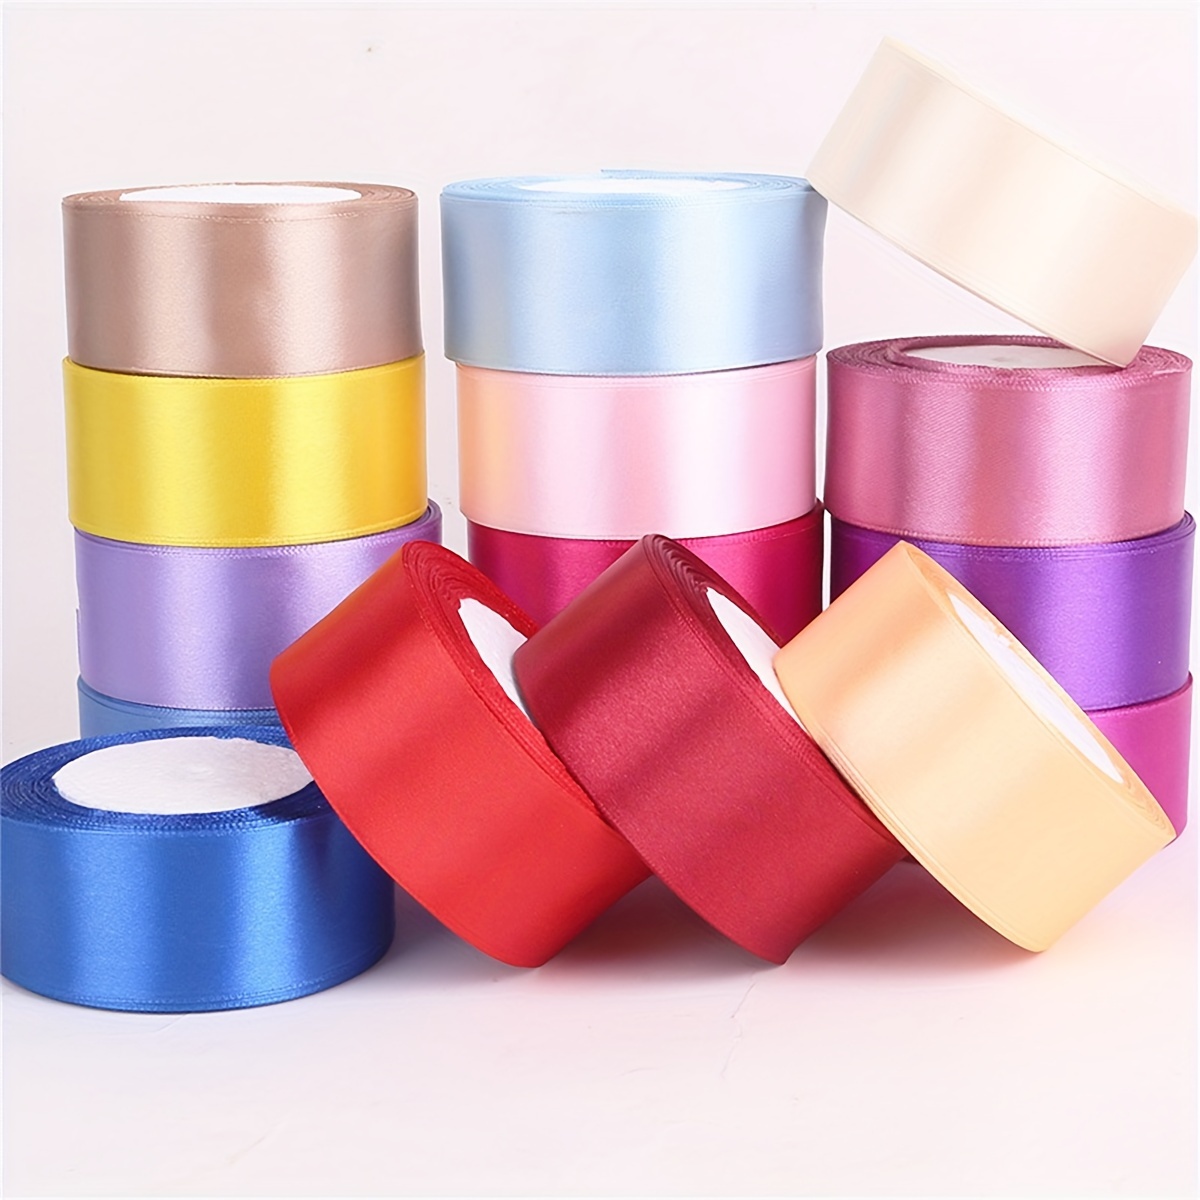 

72 Feet Solid Satin Ribbon Roll, 4cm Wide Mixed Color Craft Fabric Ribbon For Gift Wrapping, Bouquets, Wedding Party Decorations - 1 Roll